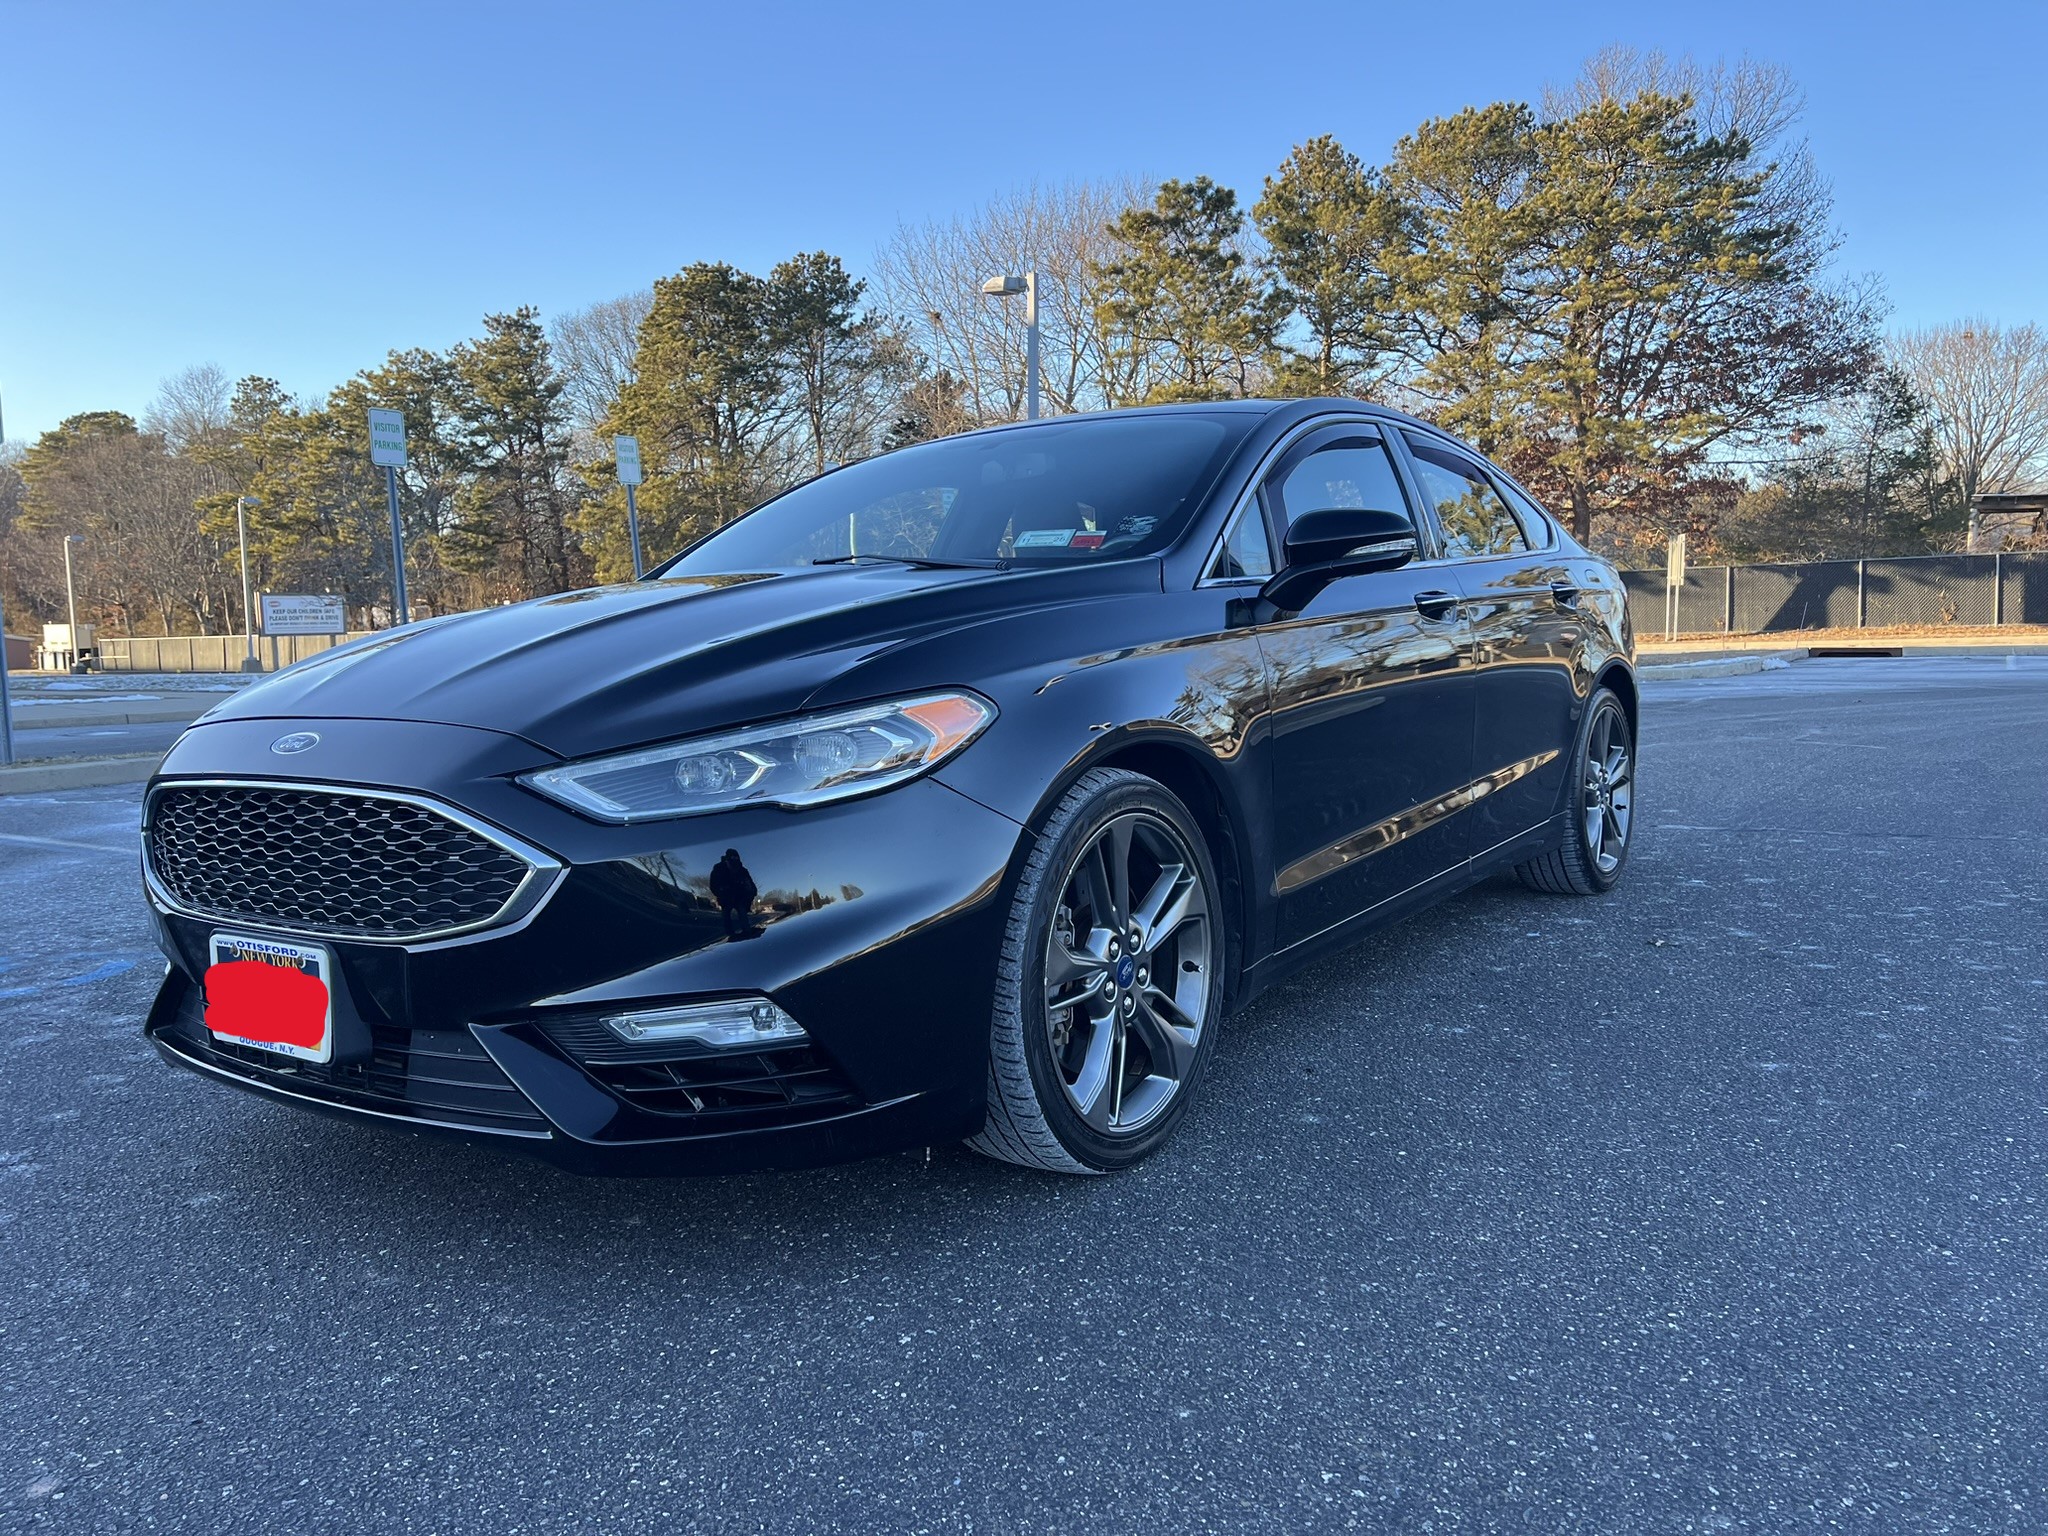 2017 Ford Fusion V6 Sport Stock # 173537 for sale near Edgewater Park, NJ